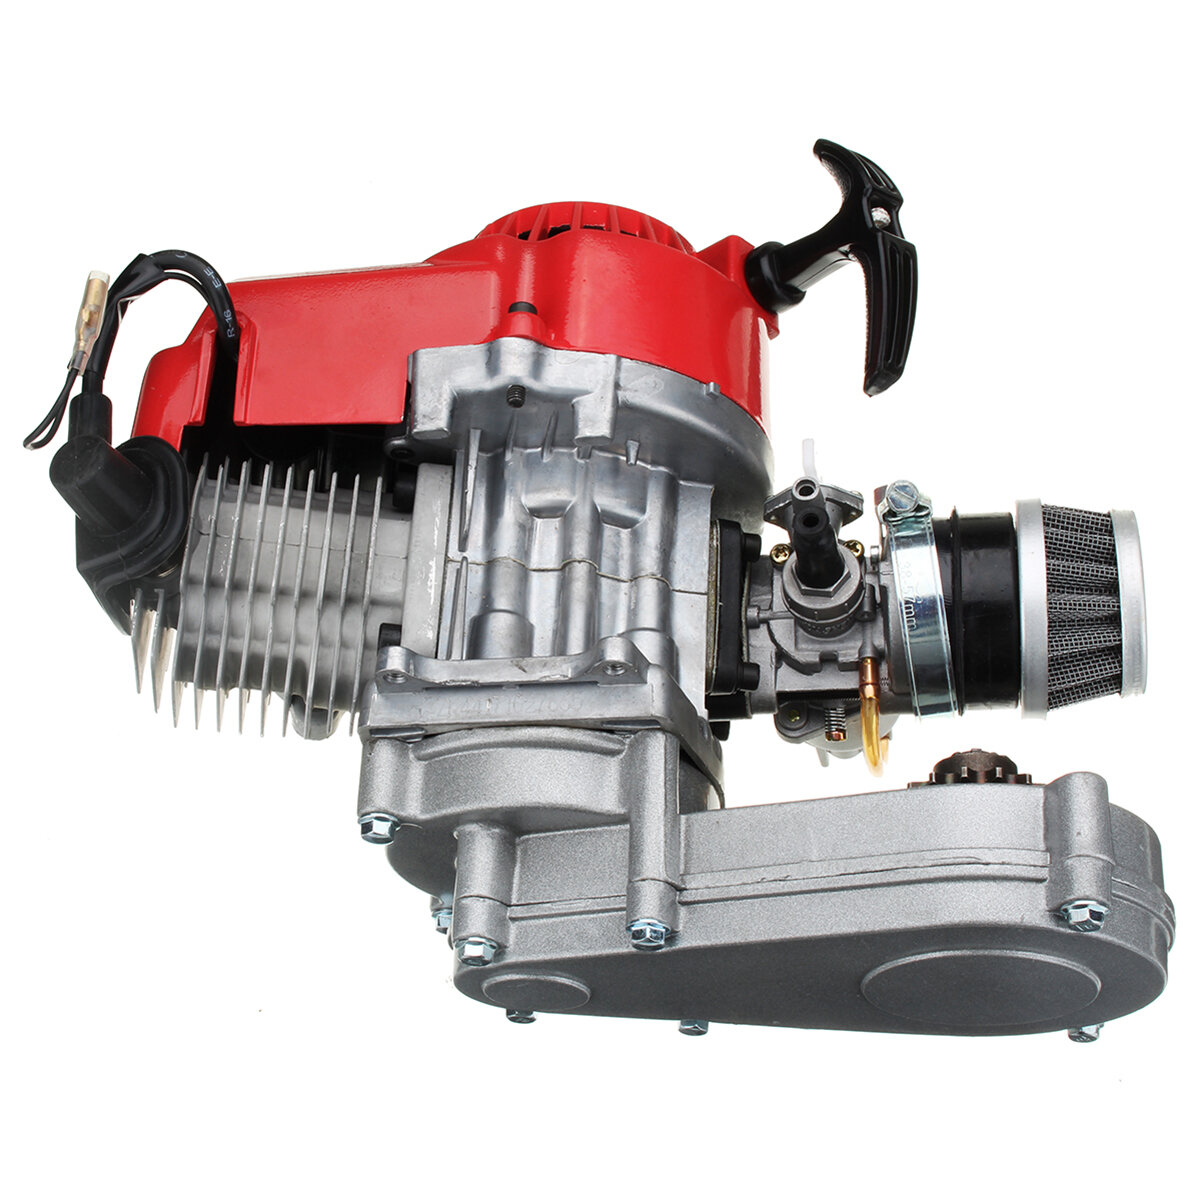 Image of 49cc Engine 2-Stroke Pull Start with Transmission For Mini Moto Dirt Bike Red